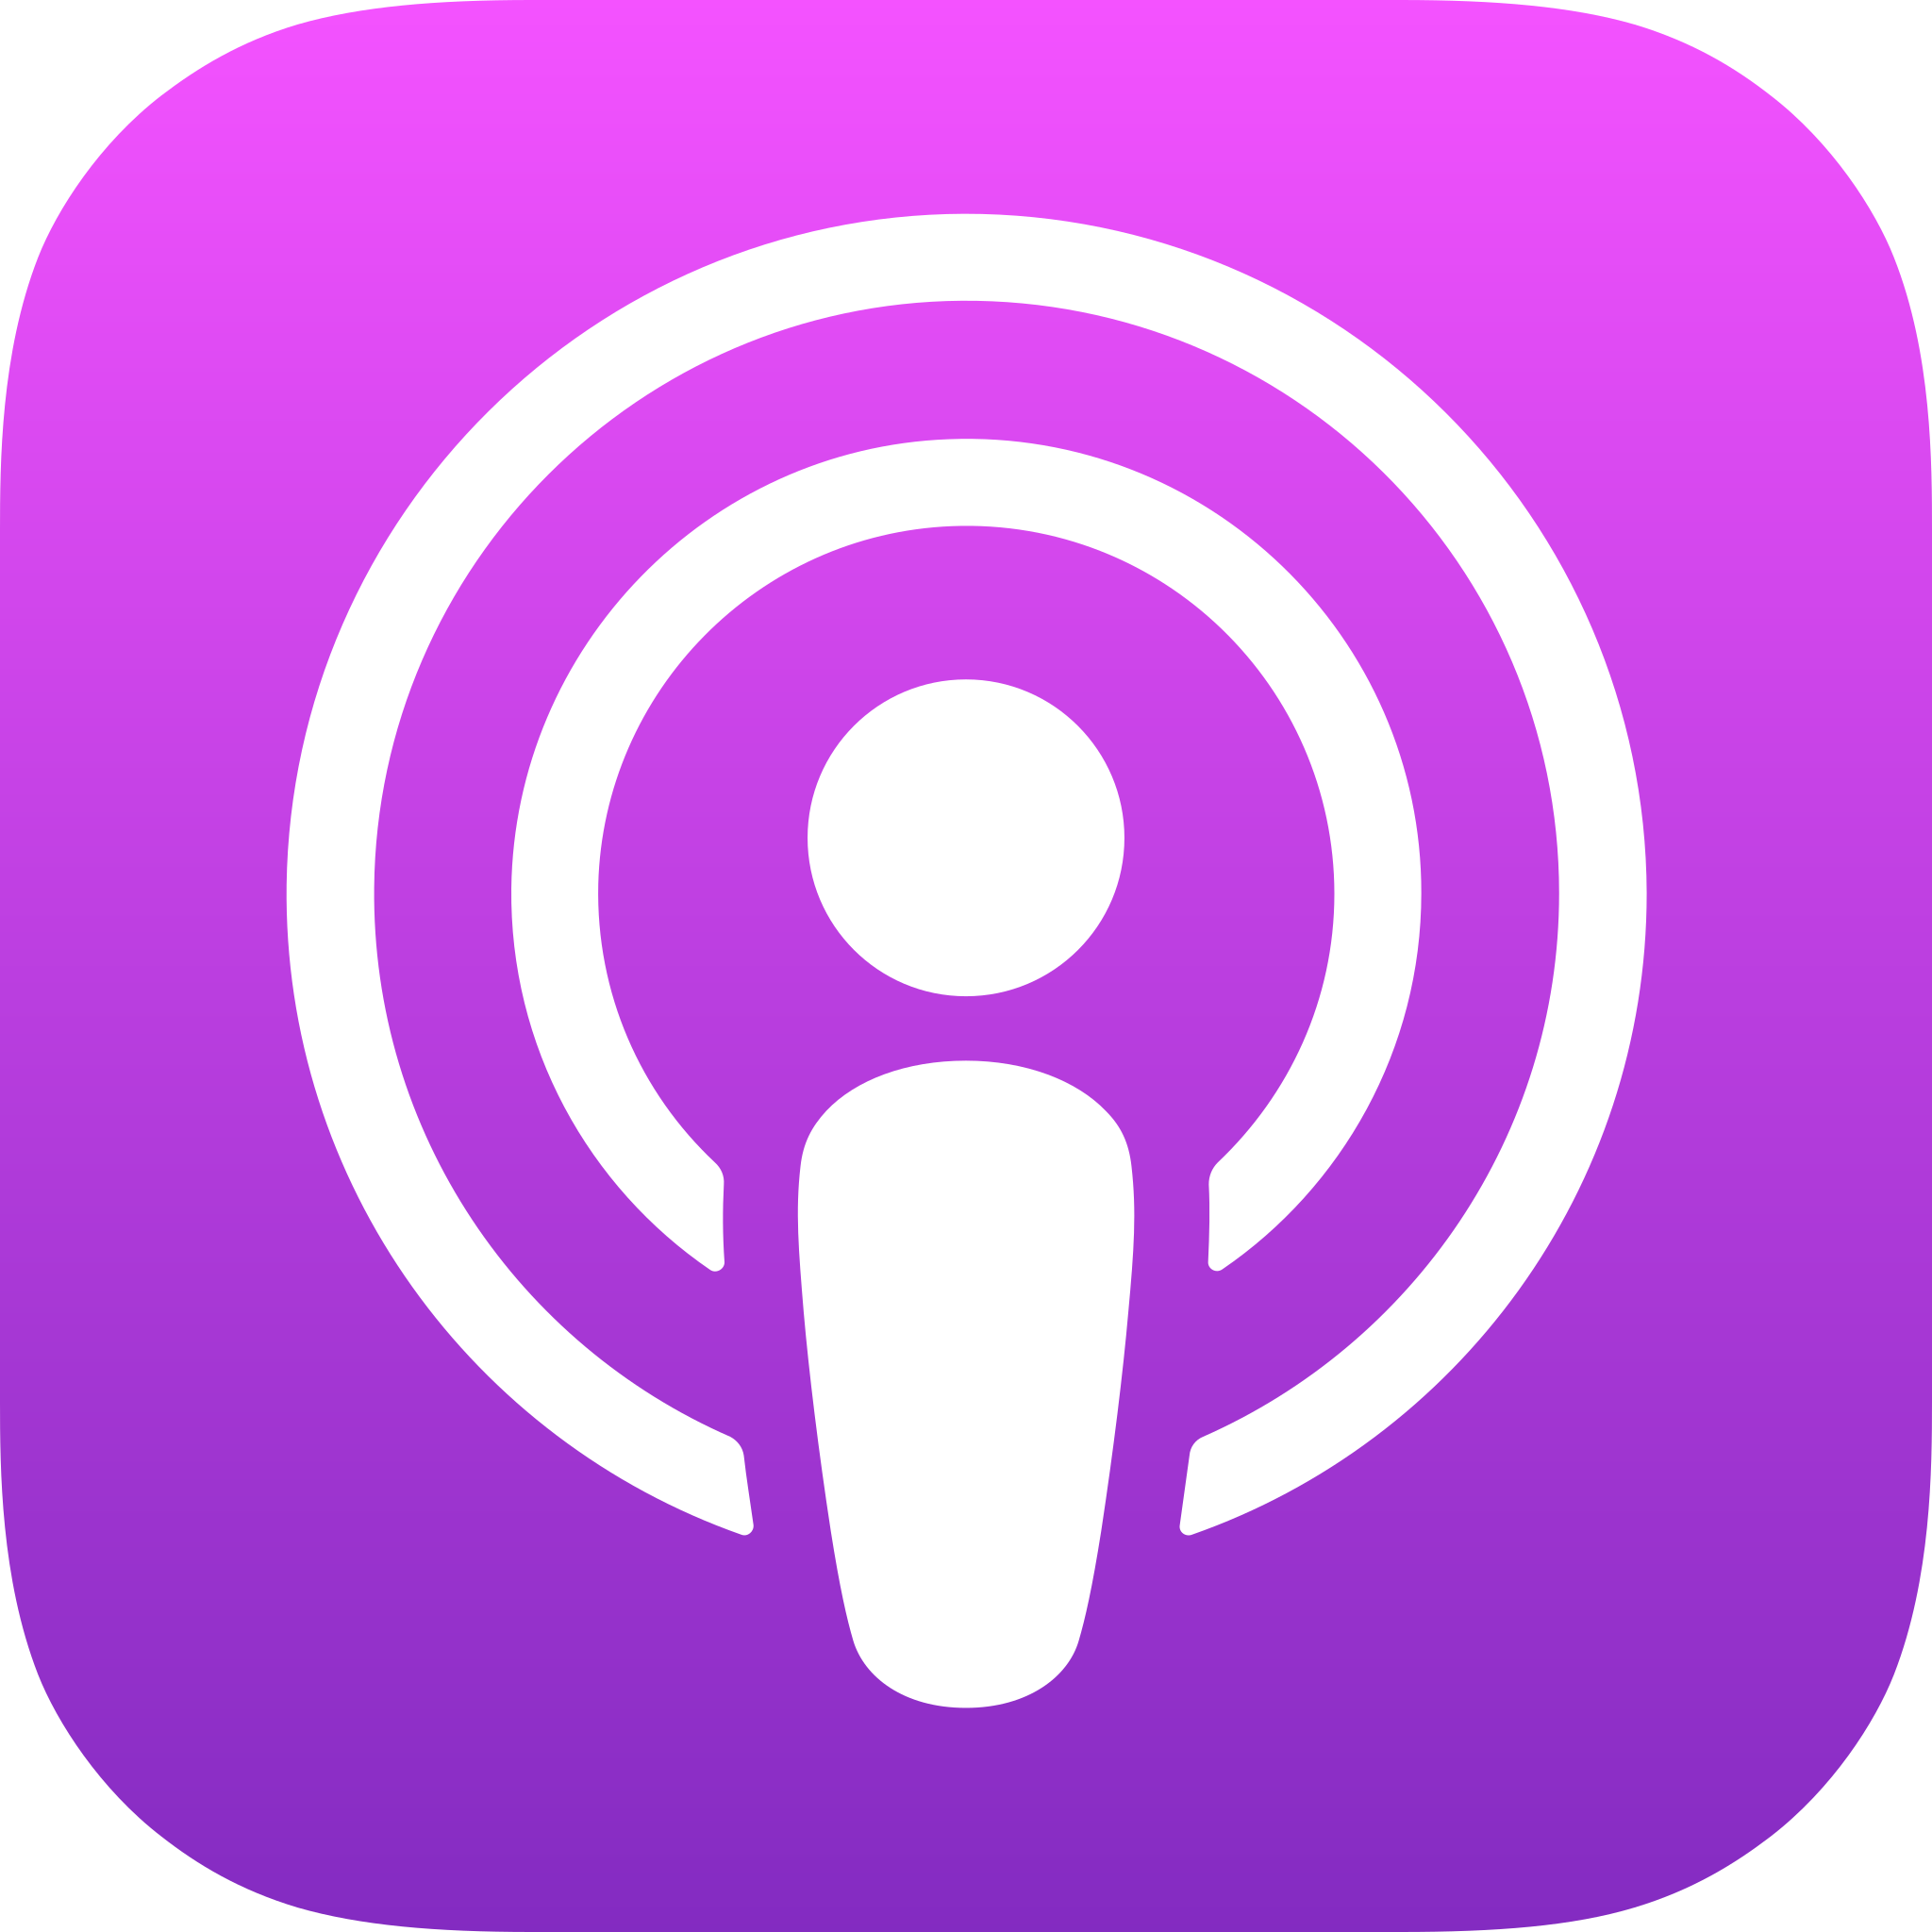 A link to access the podcast on Apple Podcasts